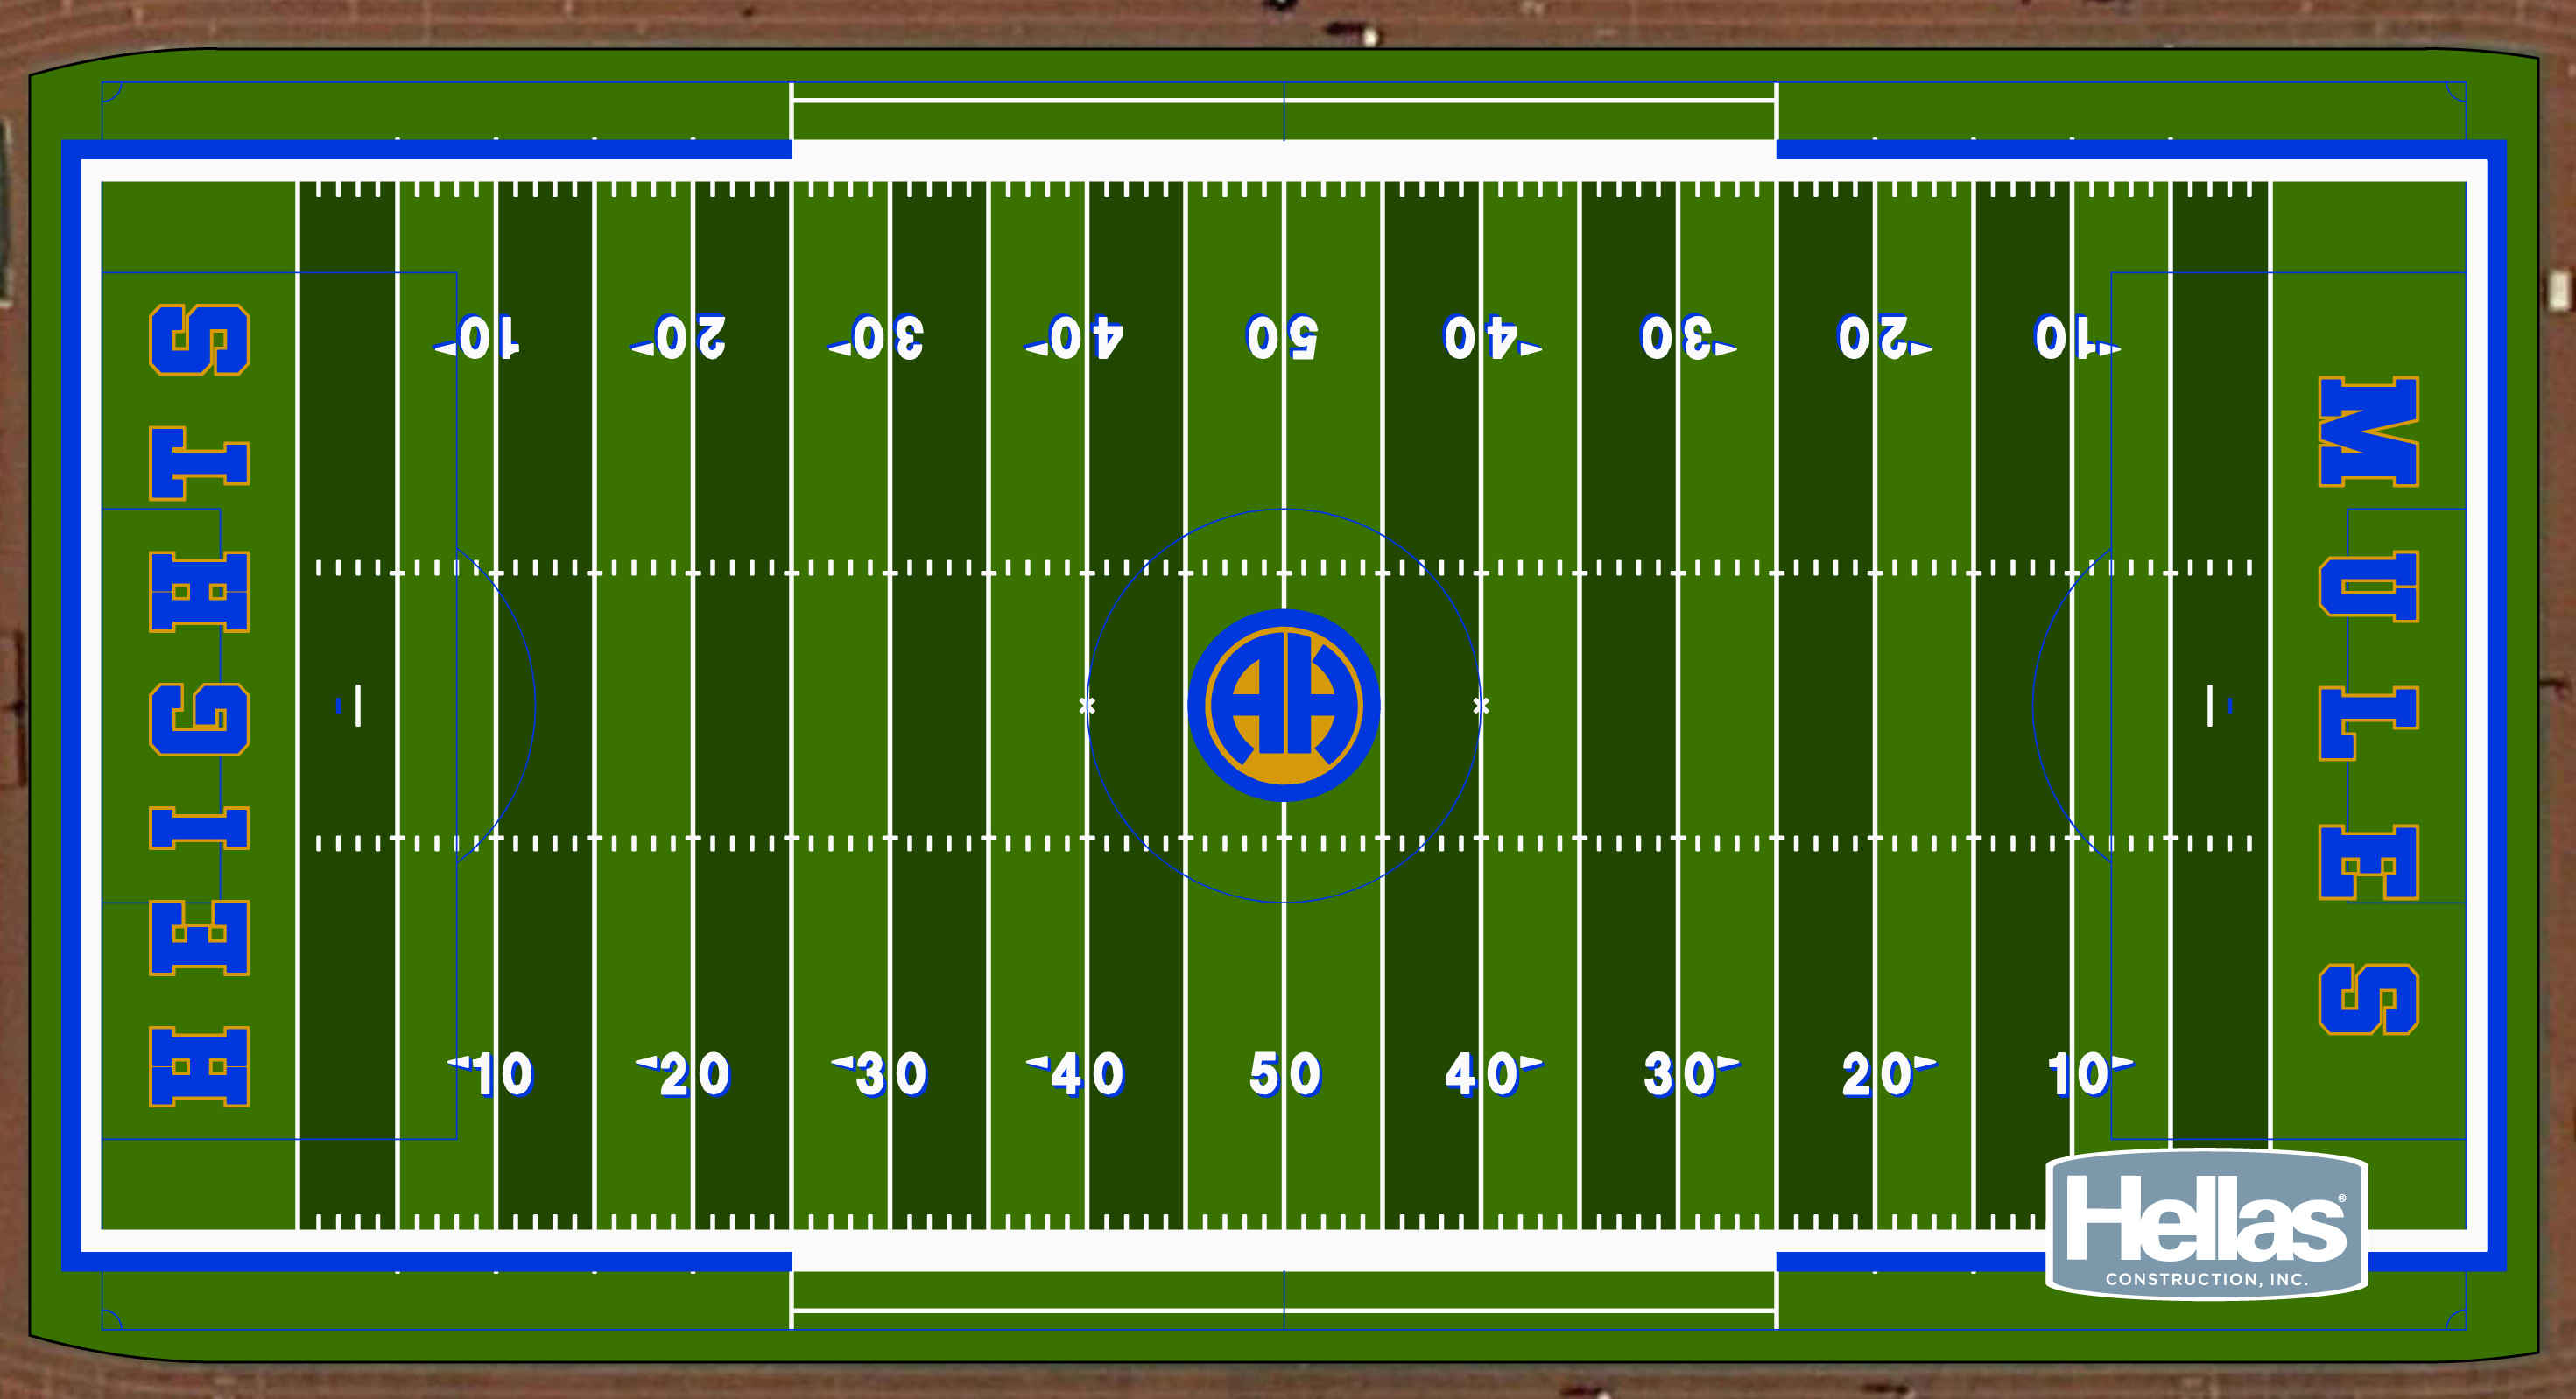 Proposed rendering of the new Matrix® Turf with Helix Technology field at Harry B. Orem Stadium in Alamo Heights. The field will feature Hellas’ new EcothermTM infill and Cushdrain® pad.